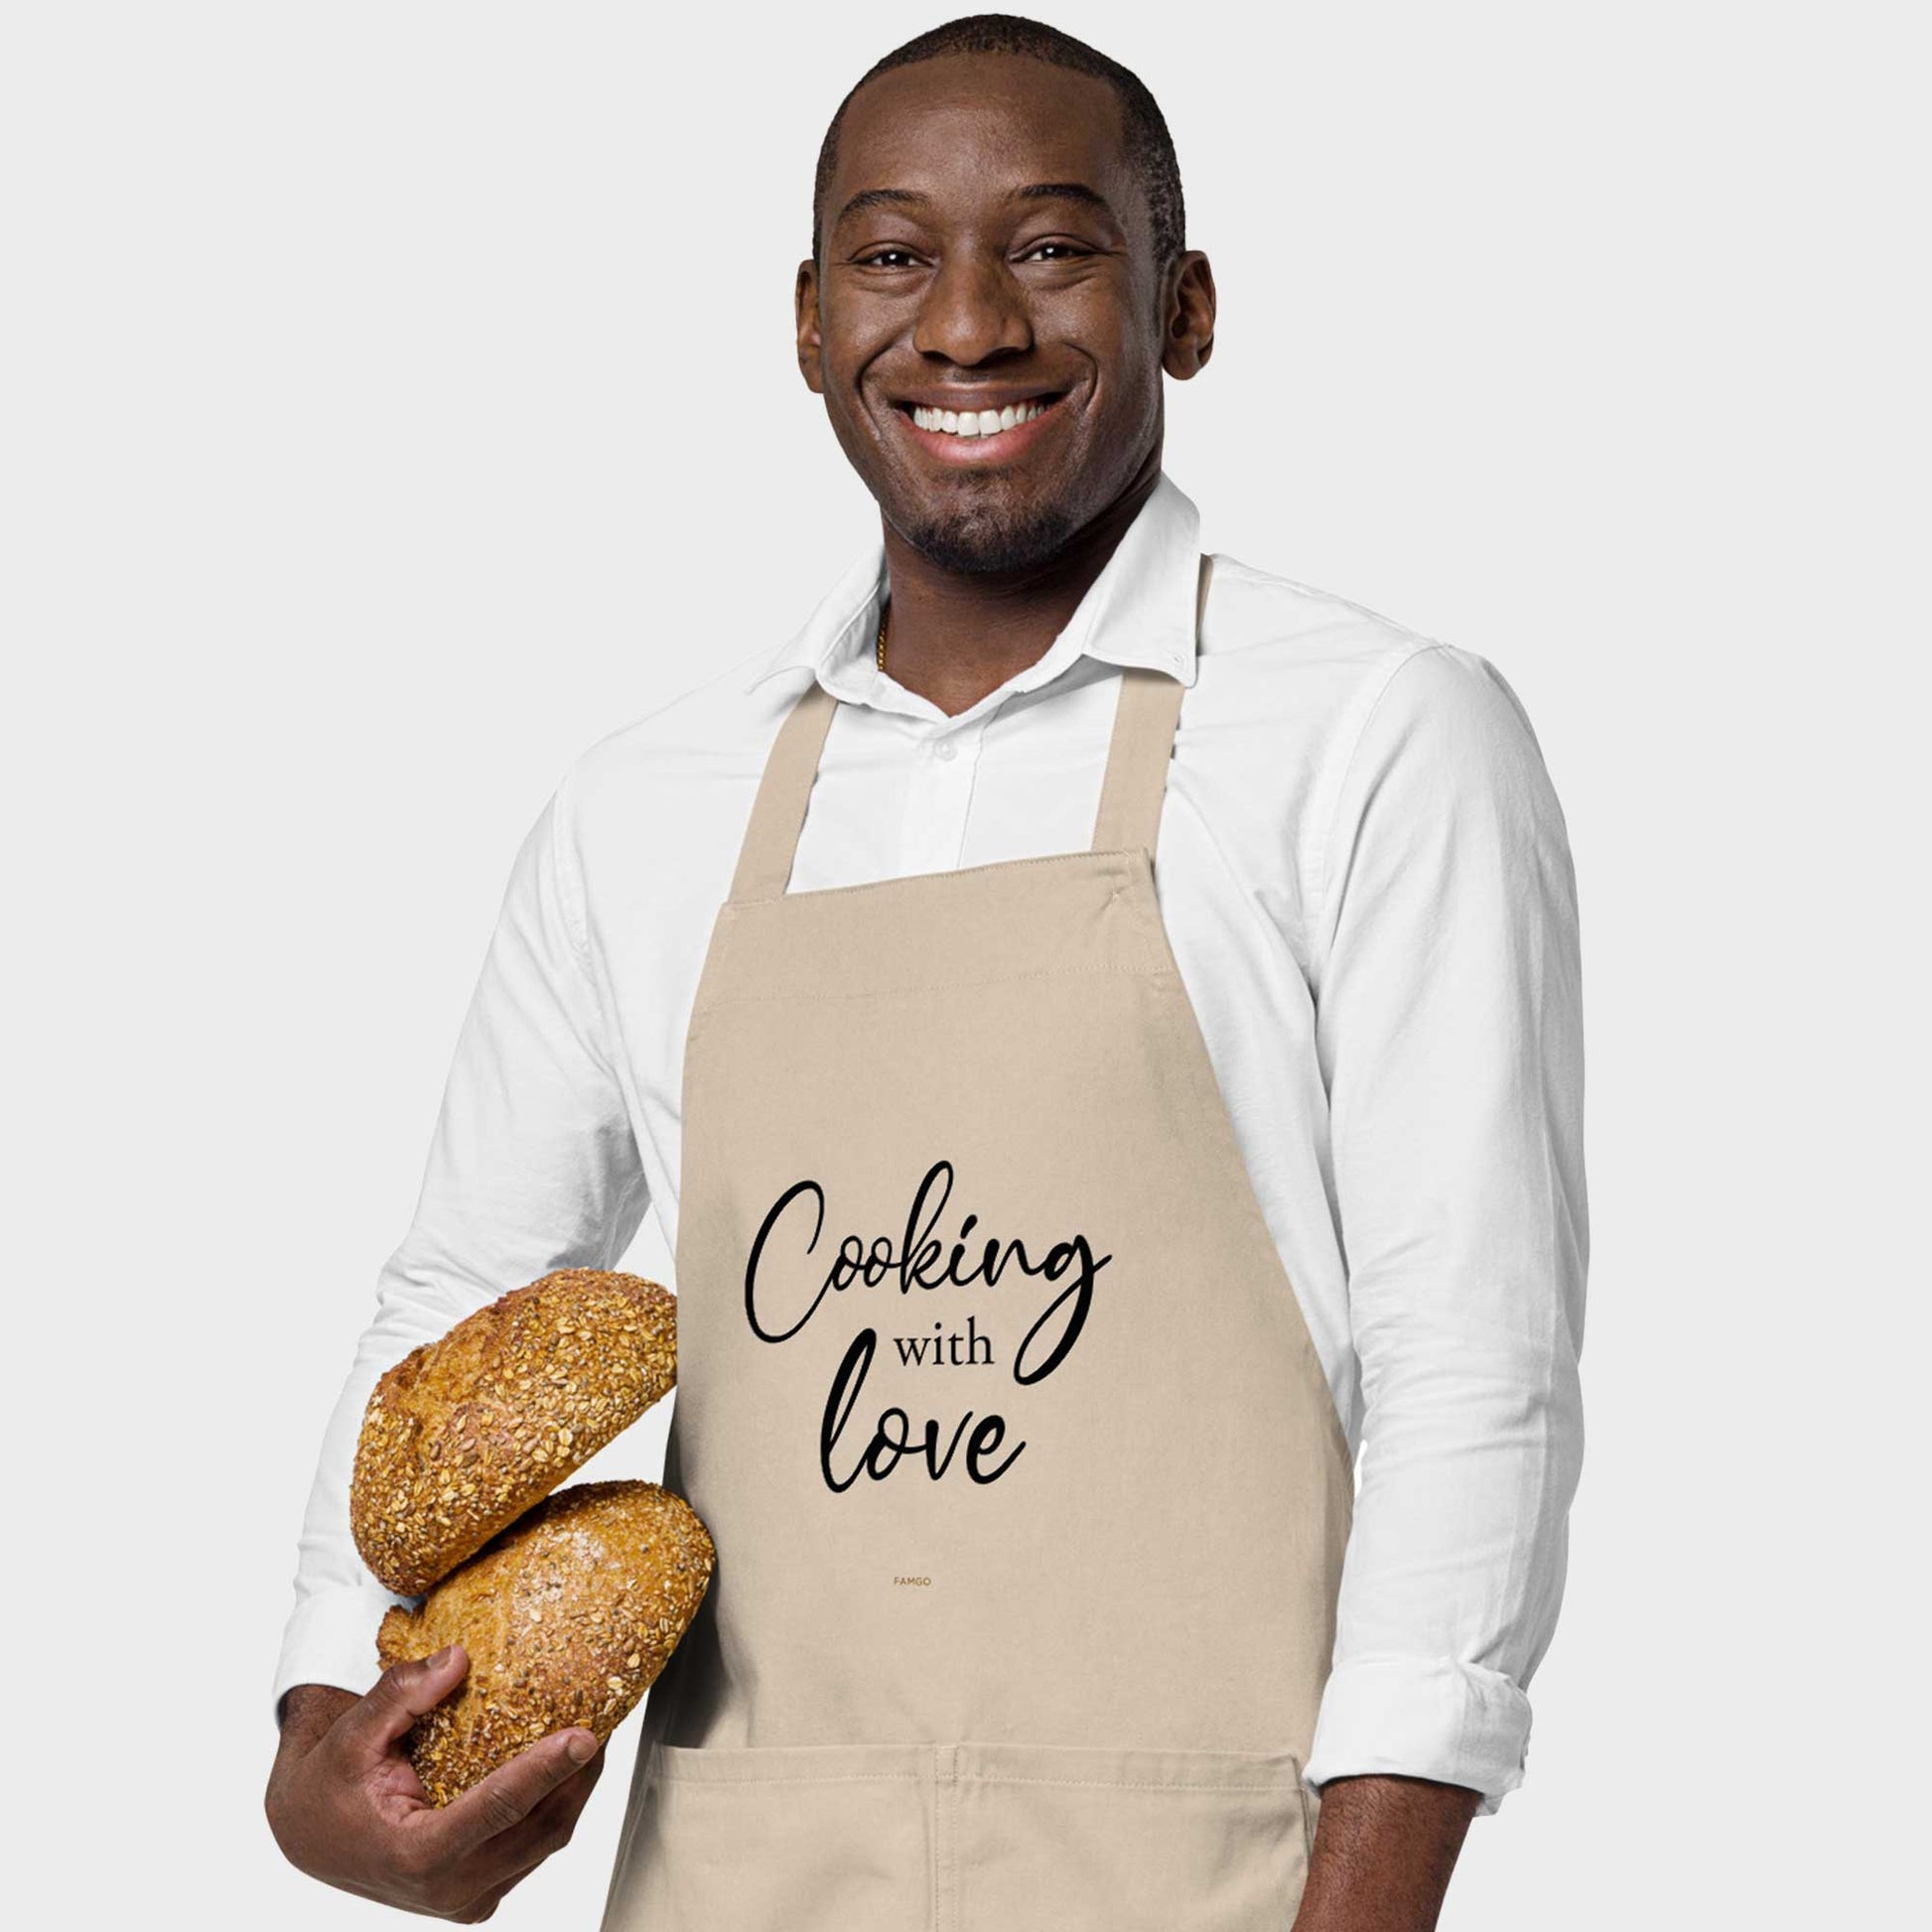 Man wearing a beige "Cooking with Love" inspirational quote 100% organic cotton apron, his right hand holding breads